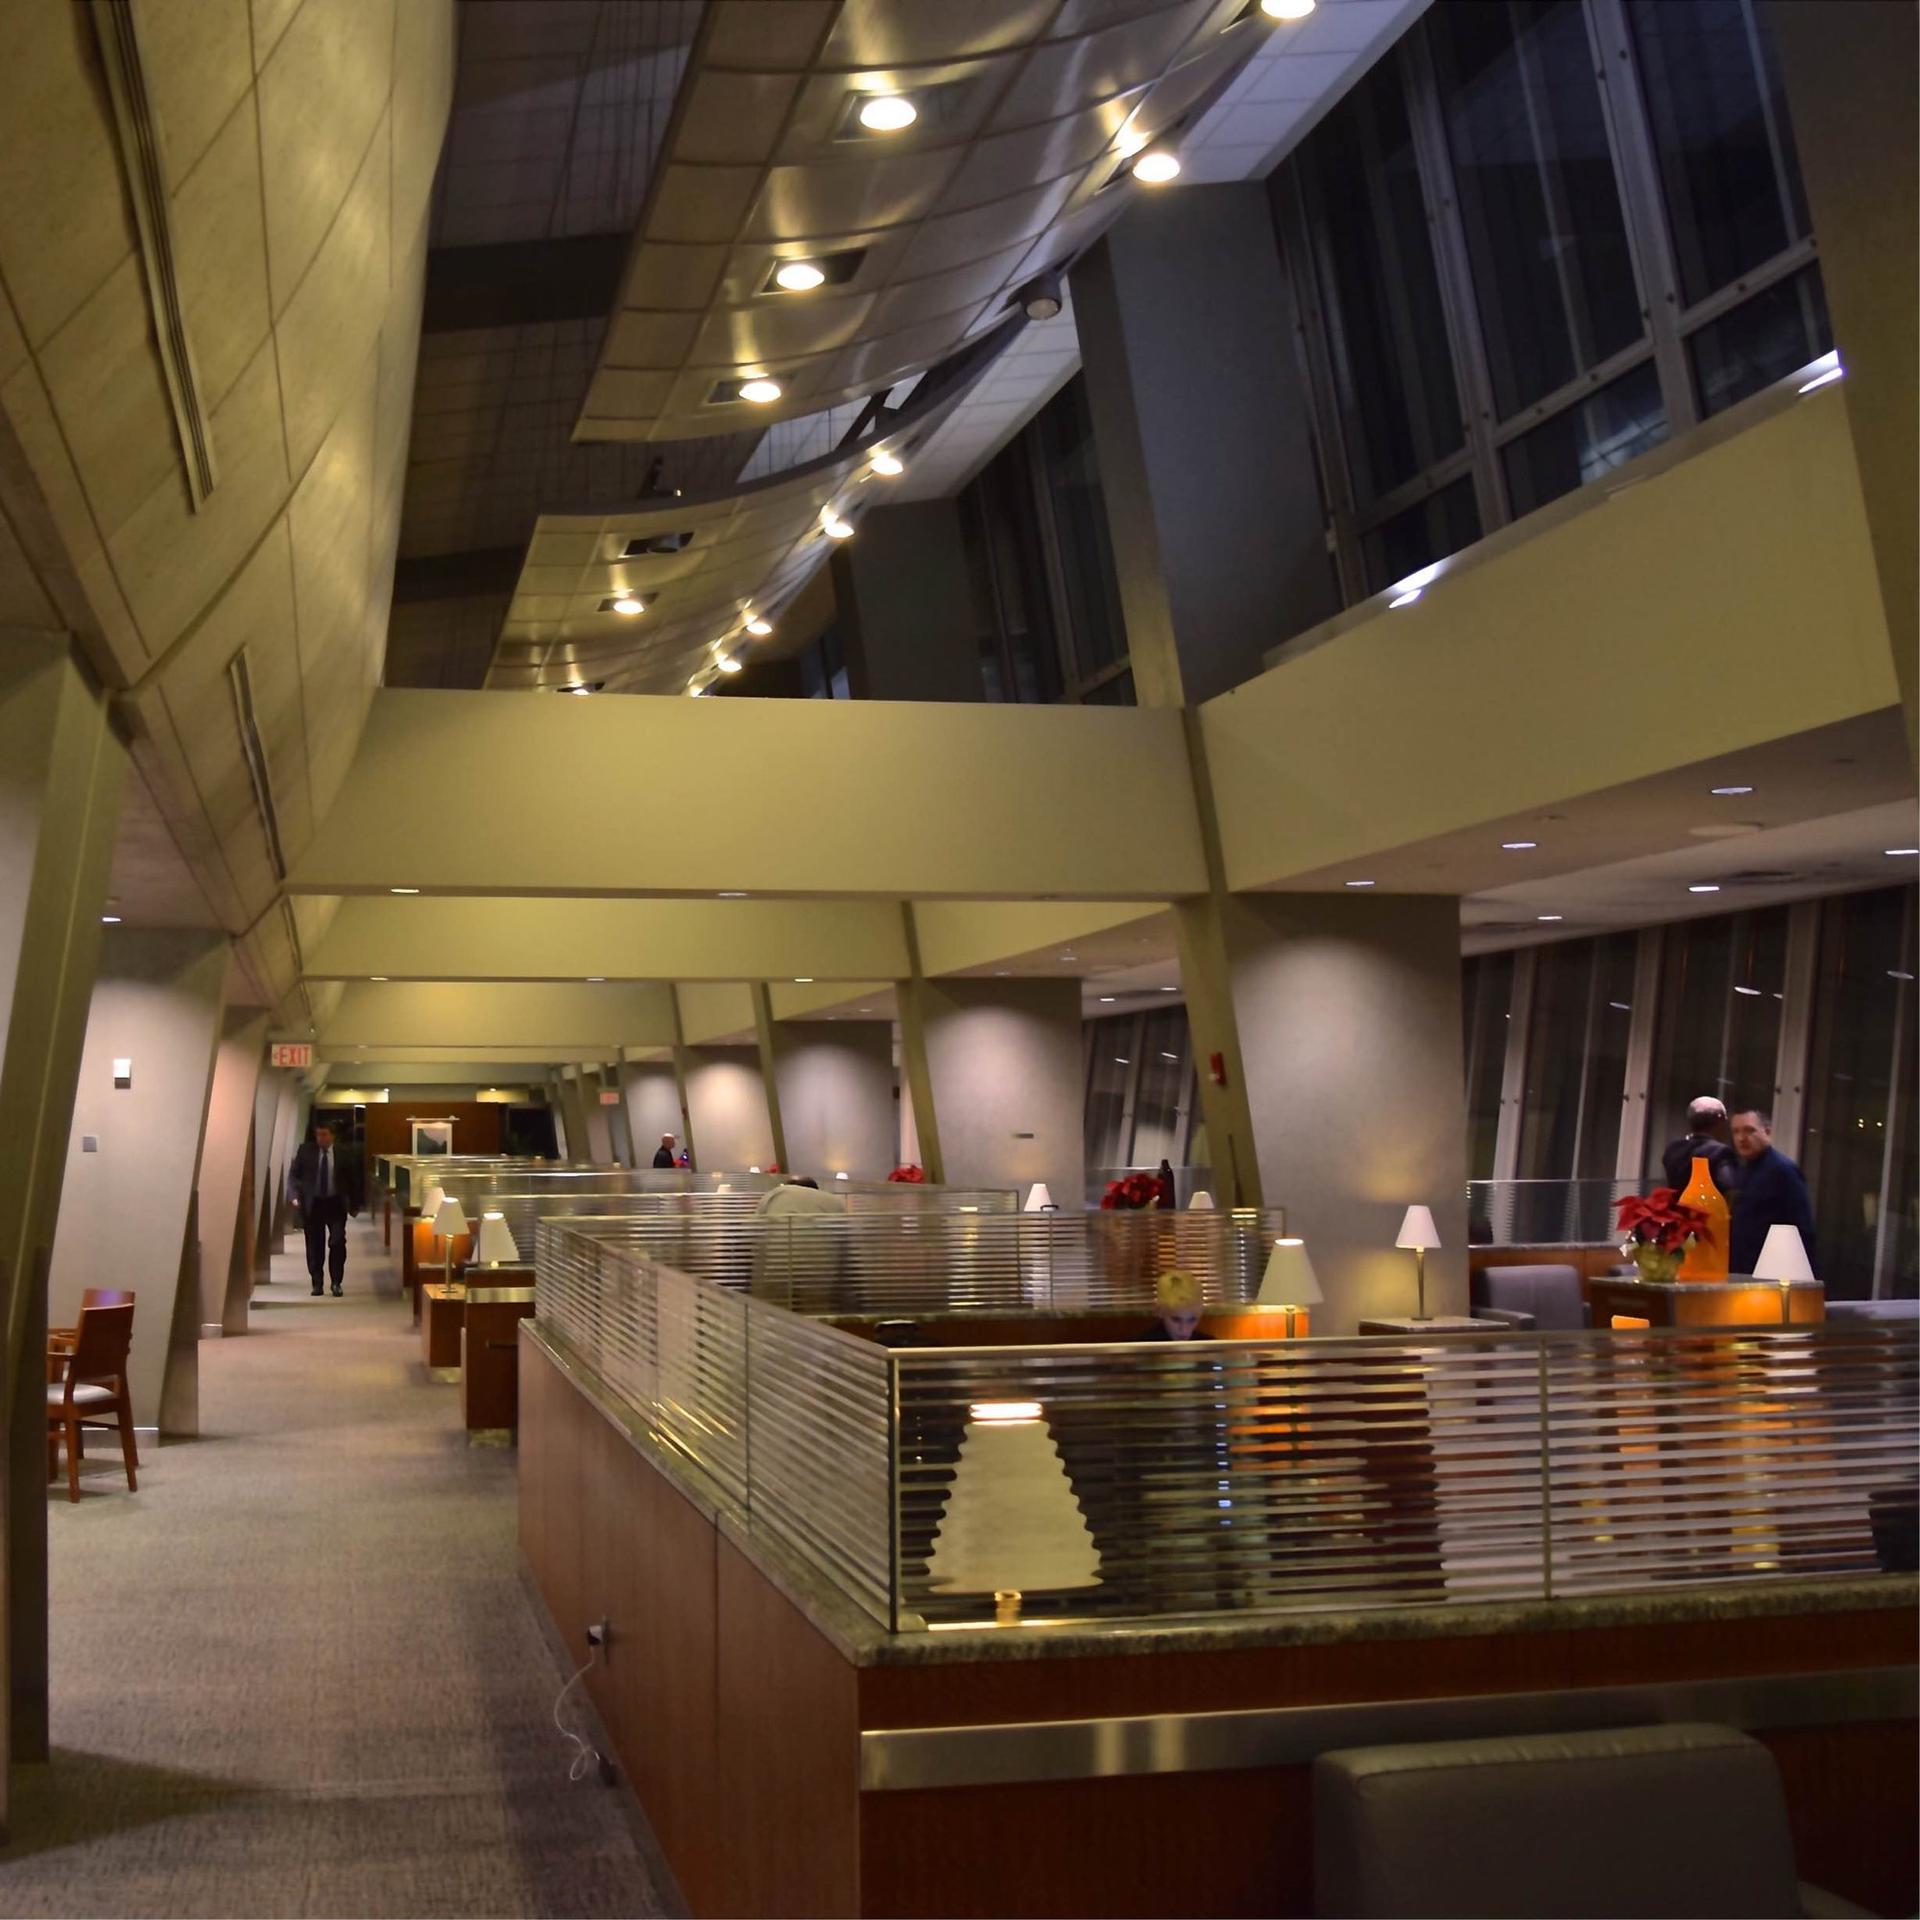 American Airlines Admirals Club image 2 of 48